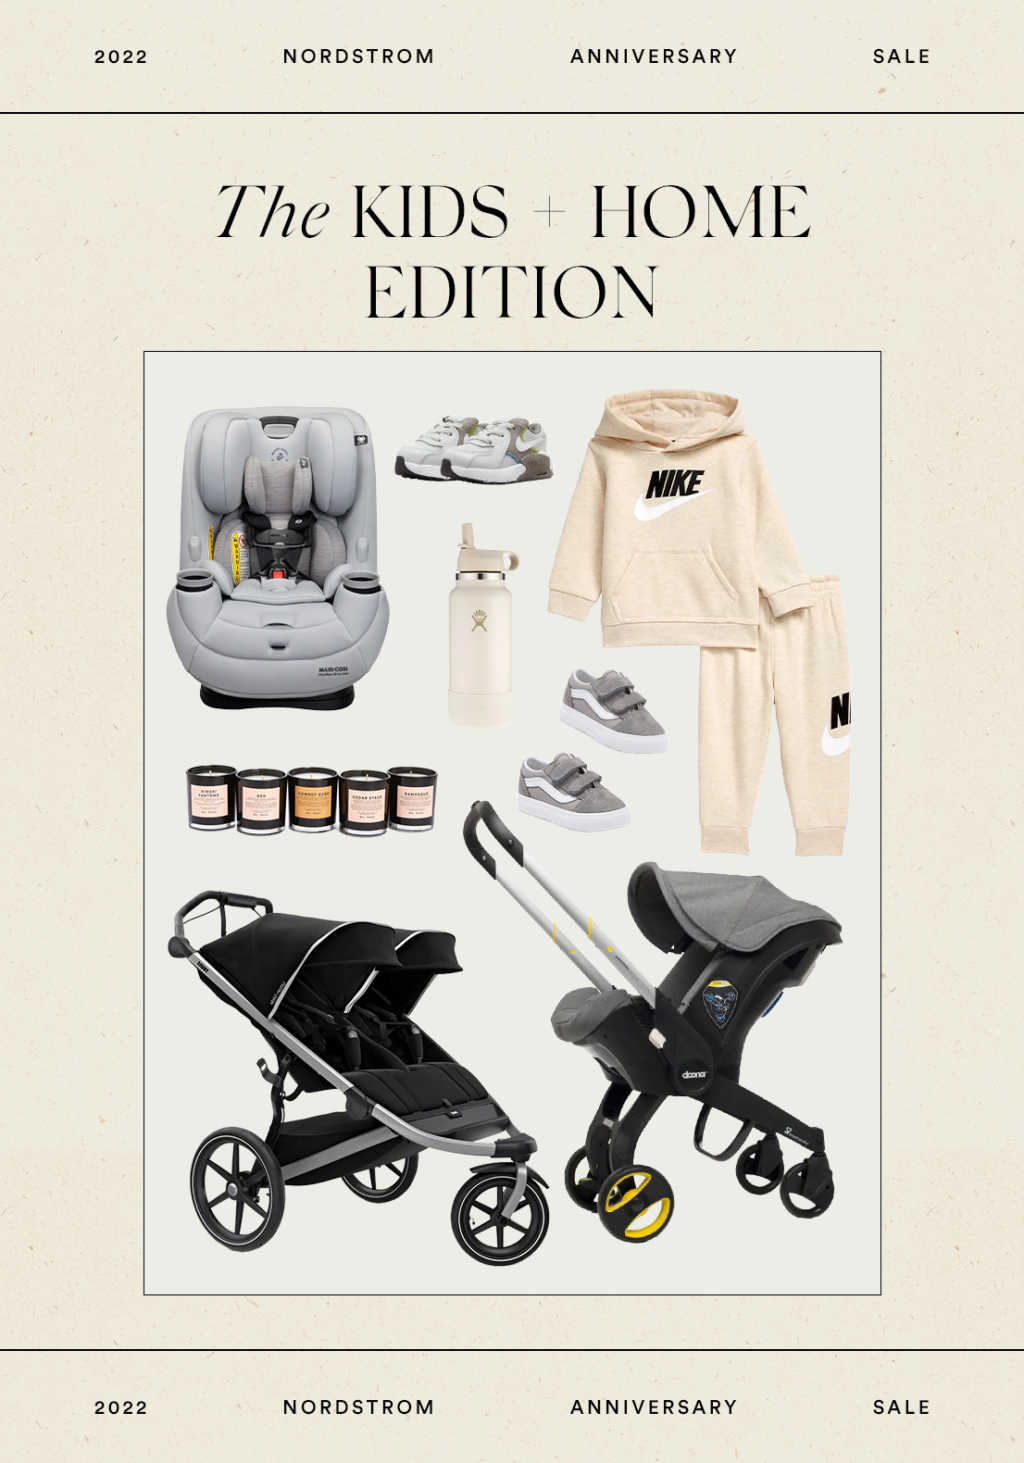 Nordstrom Anniversary Sale 2022 // The Kids + Home Edition